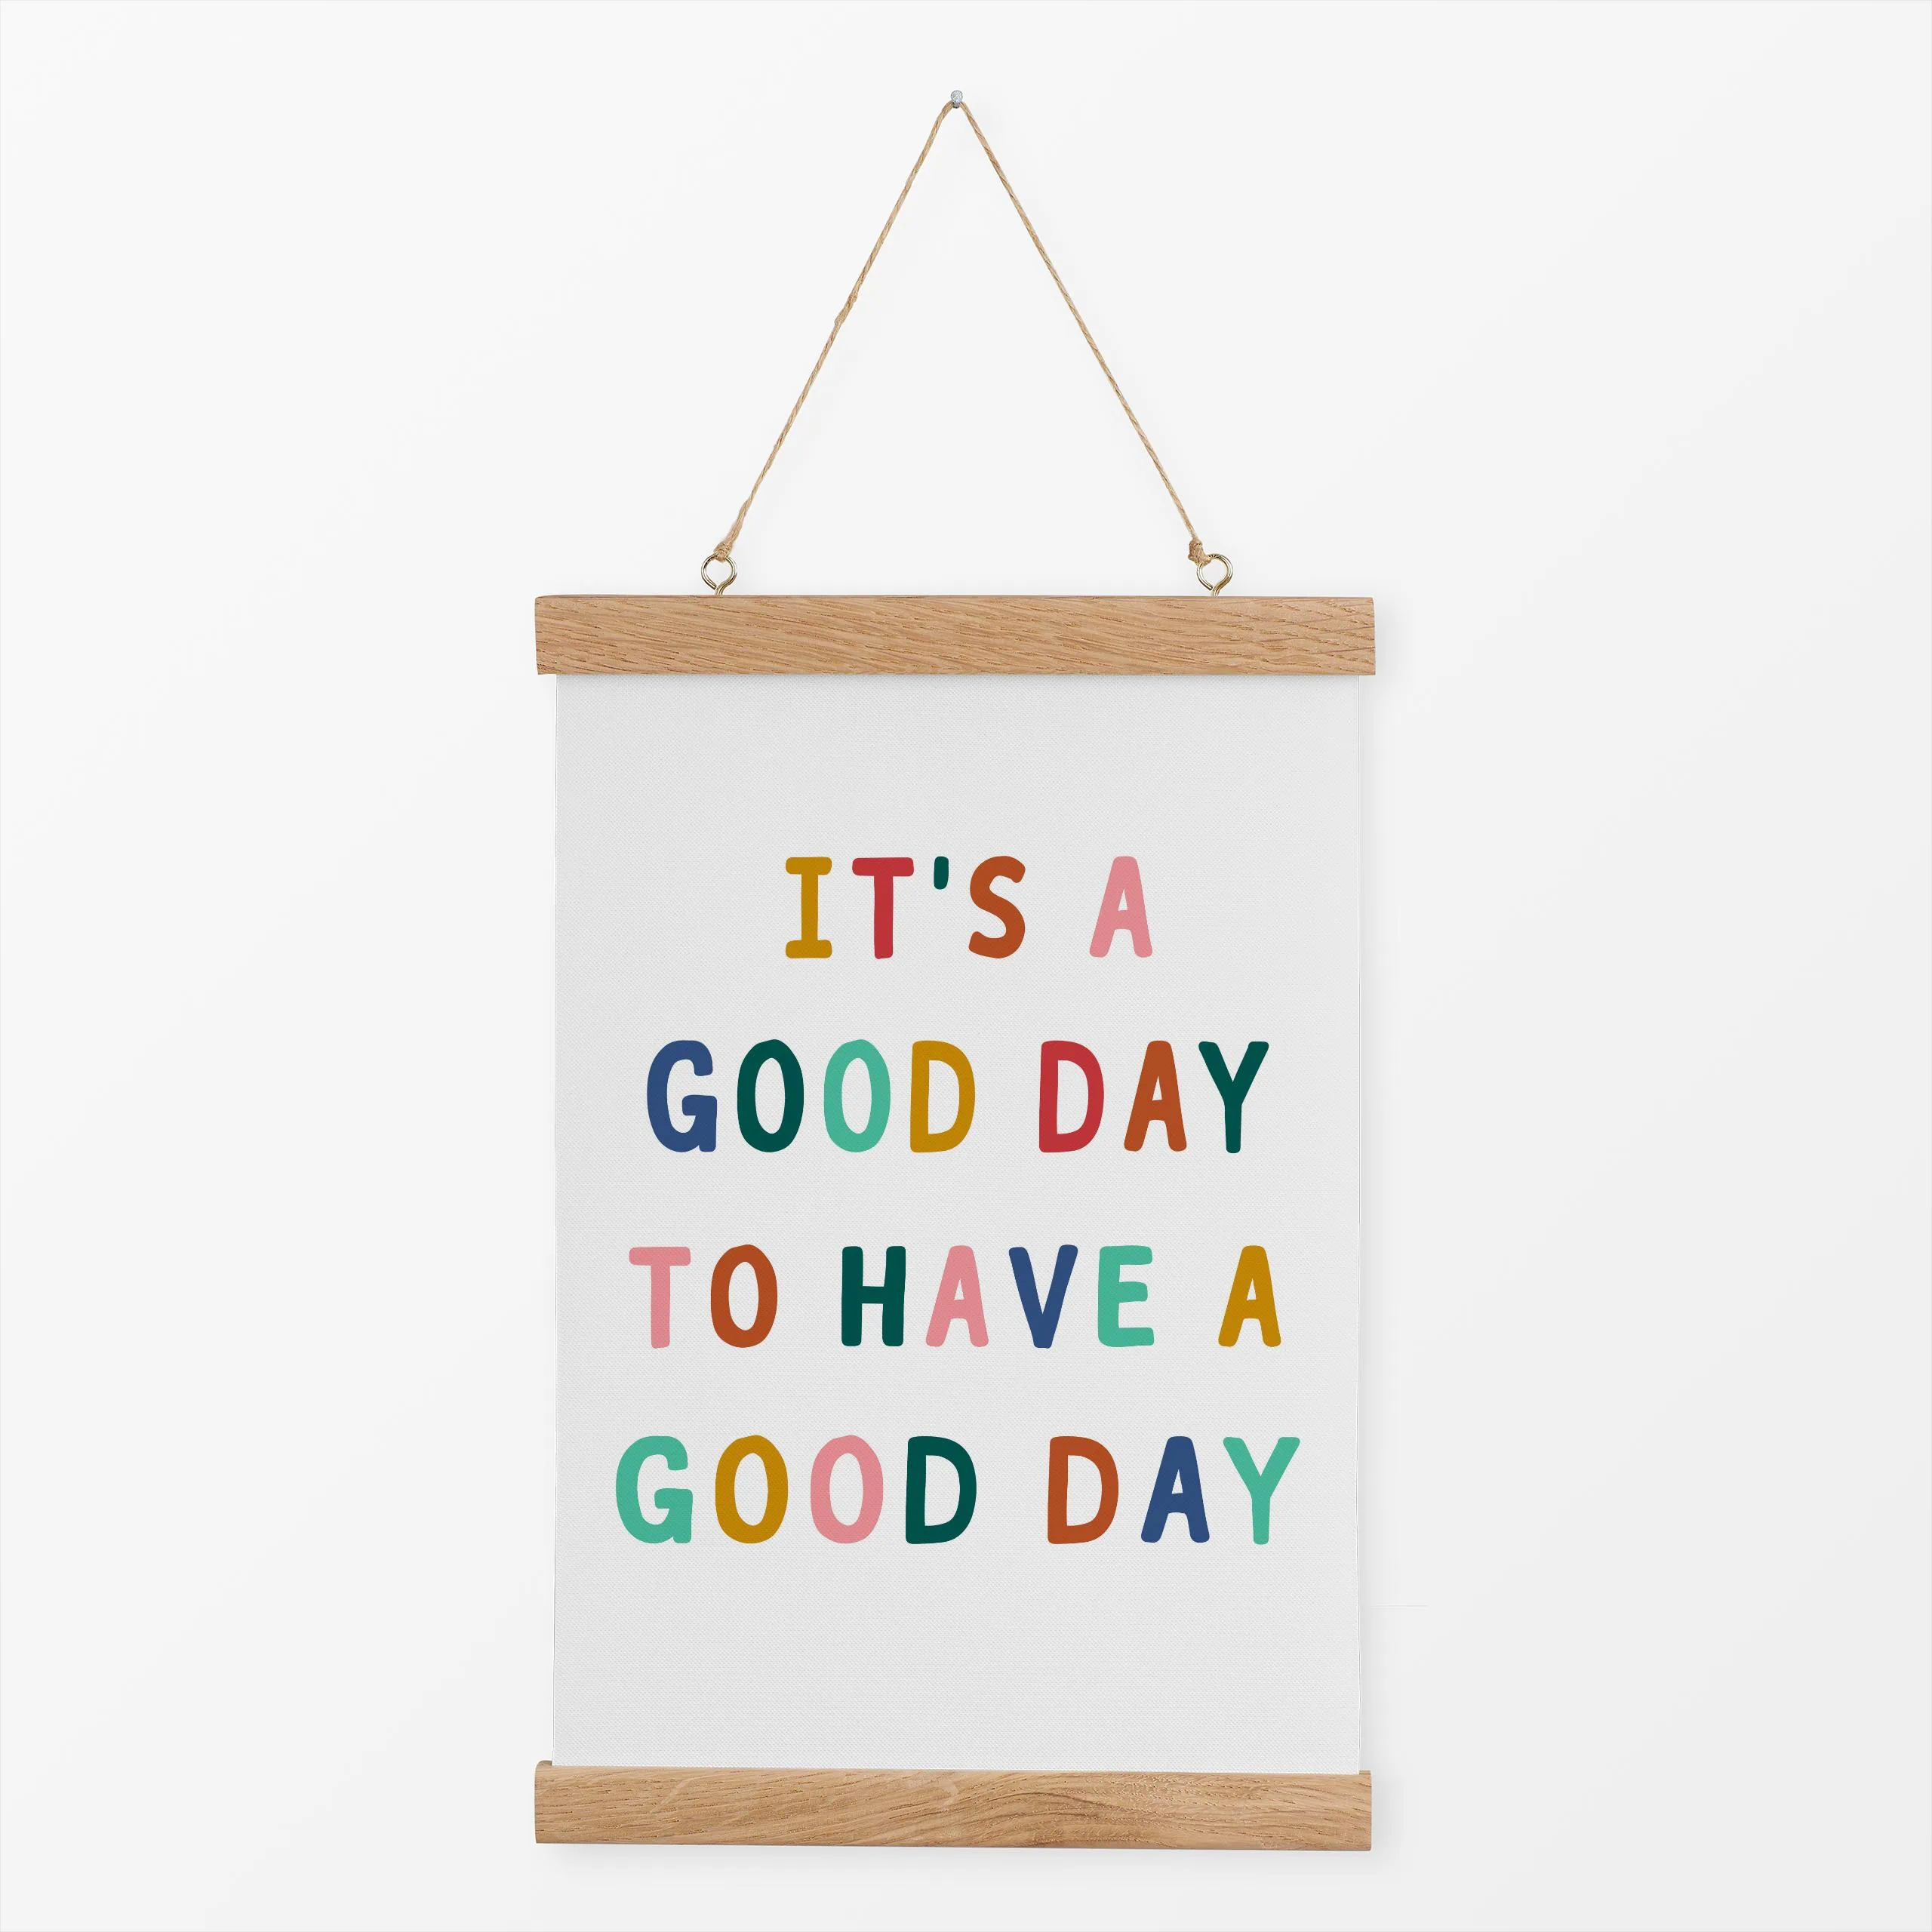 Textilposter “It's a good day to have a good day“ // HIMBEER